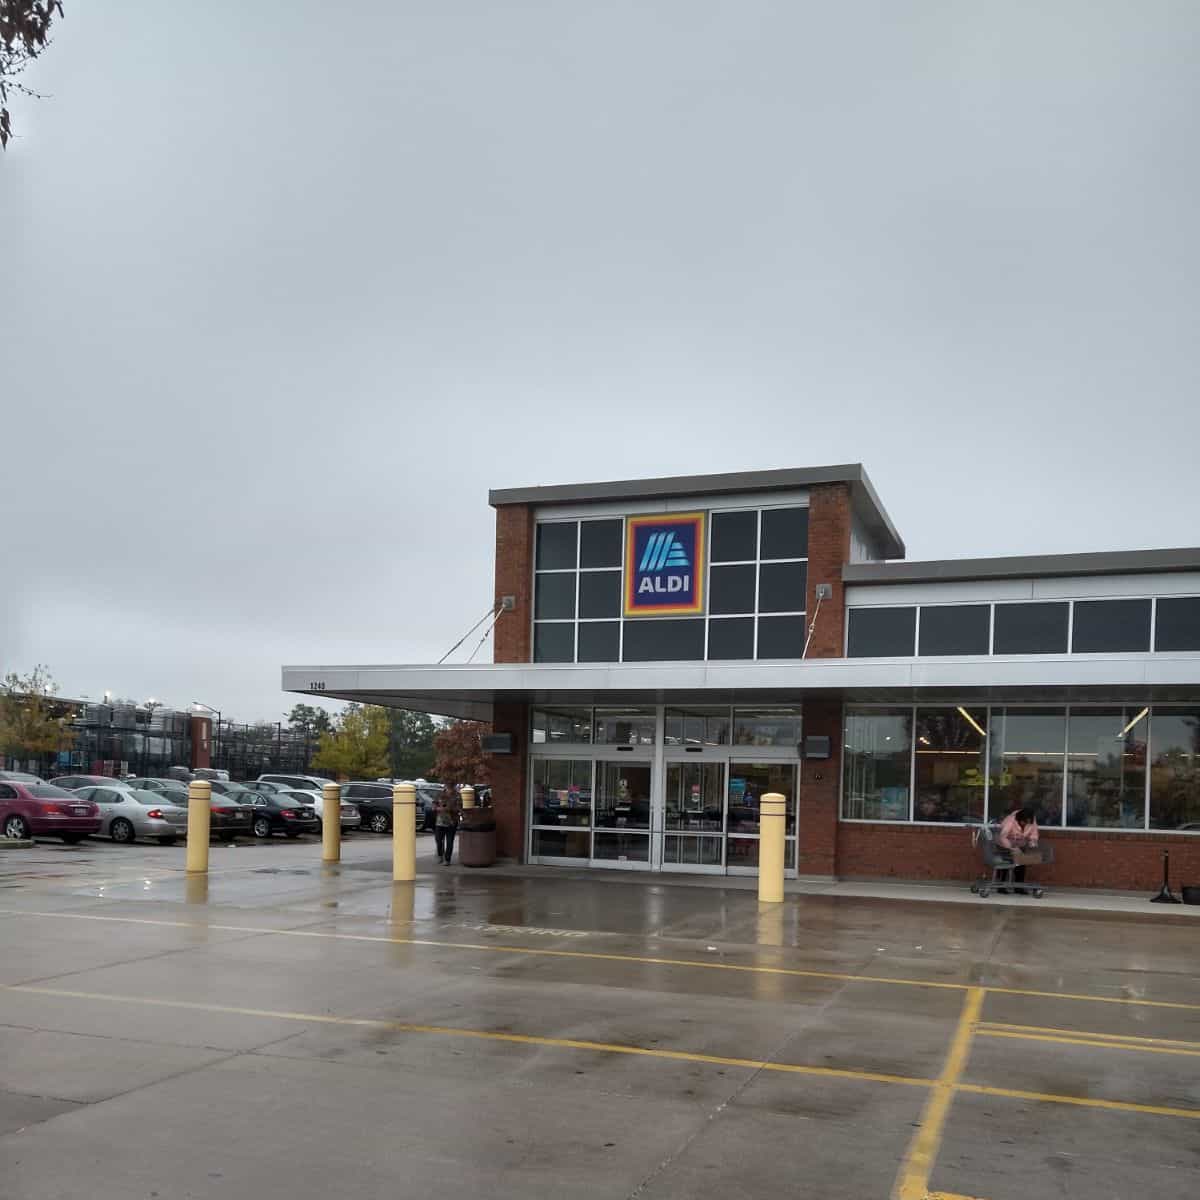 Outside of an ALDi store on a rainy day